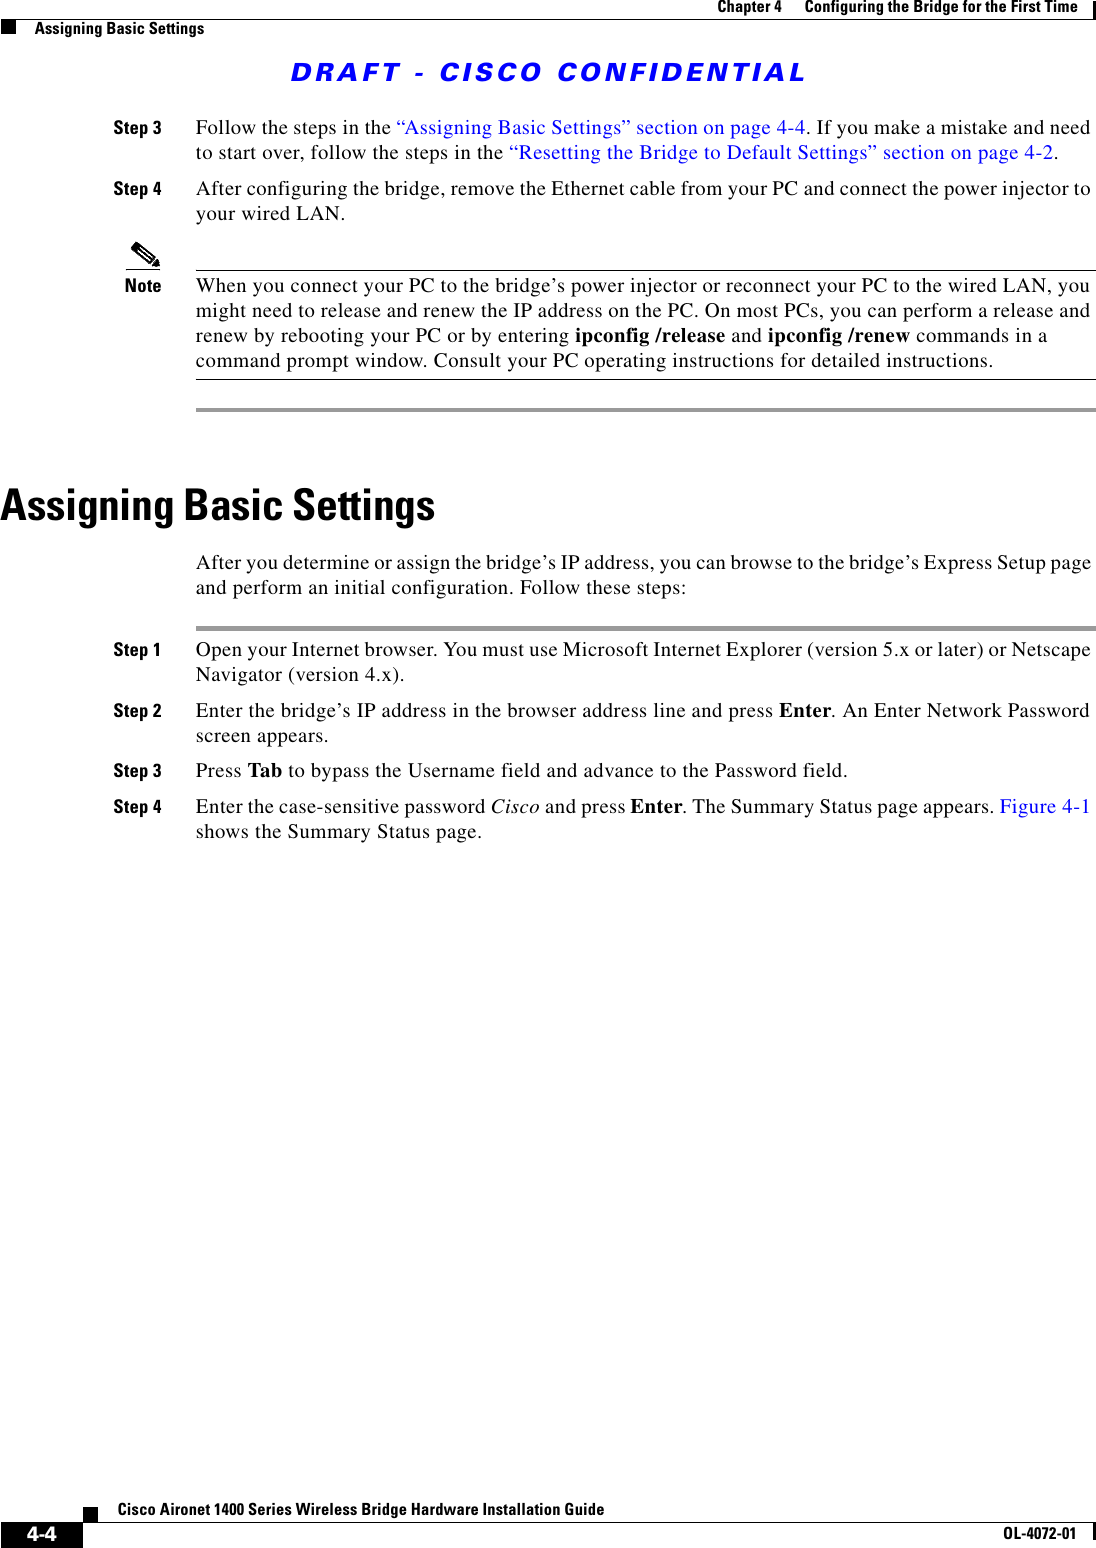 DRAFT - CISCO CONFIDENTIAL4-4Cisco Aironet 1400 Series Wireless Bridge Hardware Installation GuideOL-4072-01Chapter 4      Configuring the Bridge for the First TimeAssigning Basic SettingsStep 3 Follow the steps in the “Assigning Basic Settings” section on page 4-4. If you make a mistake and need to start over, follow the steps in the “Resetting the Bridge to Default Settings” section on page 4-2.Step 4 After configuring the bridge, remove the Ethernet cable from your PC and connect the power injector to your wired LAN.Note When you connect your PC to the bridge’s power injector or reconnect your PC to the wired LAN, you might need to release and renew the IP address on the PC. On most PCs, you can perform a release and renew by rebooting your PC or by entering ipconfig /release and ipconfig /renew commands in a command prompt window. Consult your PC operating instructions for detailed instructions.Assigning Basic SettingsAfter you determine or assign the bridge’s IP address, you can browse to the bridge’s Express Setup page and perform an initial configuration. Follow these steps:Step 1 Open your Internet browser. You must use Microsoft Internet Explorer (version 5.x or later) or Netscape Navigator (version 4.x).Step 2 Enter the bridge’s IP address in the browser address line and press Enter. An Enter Network Password screen appears.Step 3 Press Tab to bypass the Username field and advance to the Password field.Step 4 Enter the case-sensitive password Cisco and press Enter. The Summary Status page appears. Figure 4-1 shows the Summary Status page.